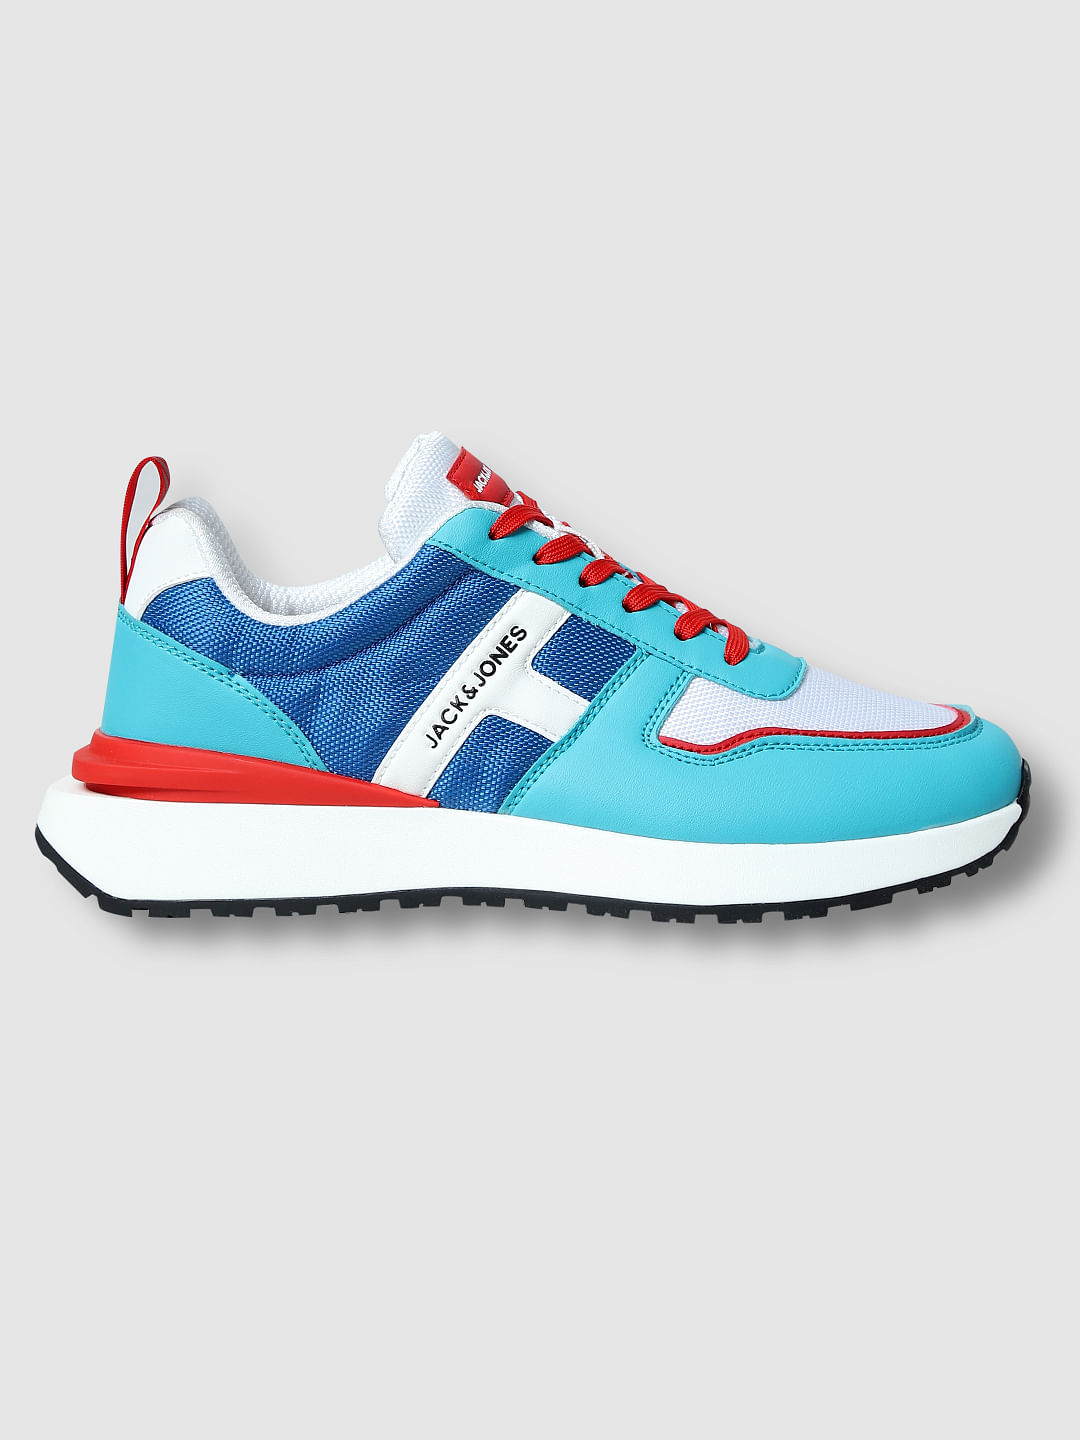 Git Off White Red Blue Colour Tiger Sneakers Sports Shoes 23010 – Luxury  D'Allure